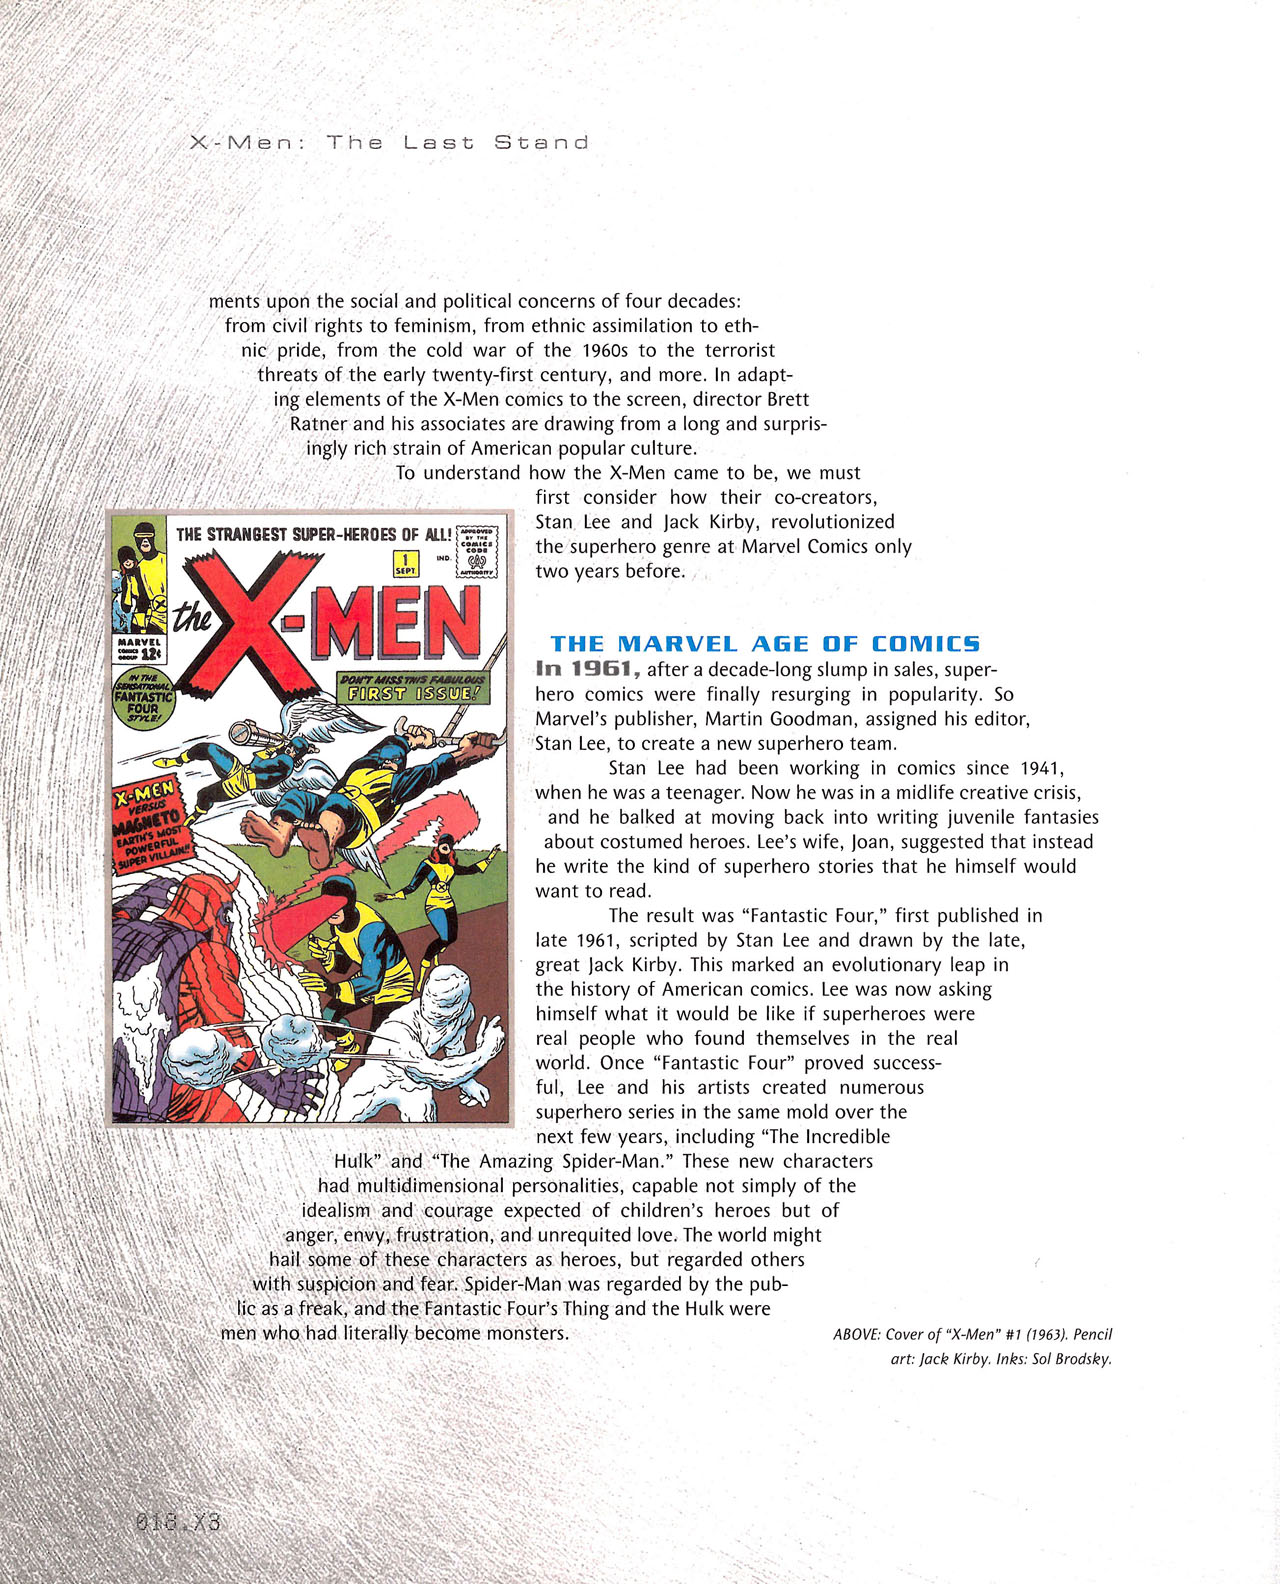 Read online The Art of X-Men: The Last Stand comic -  Issue # TPB - 17